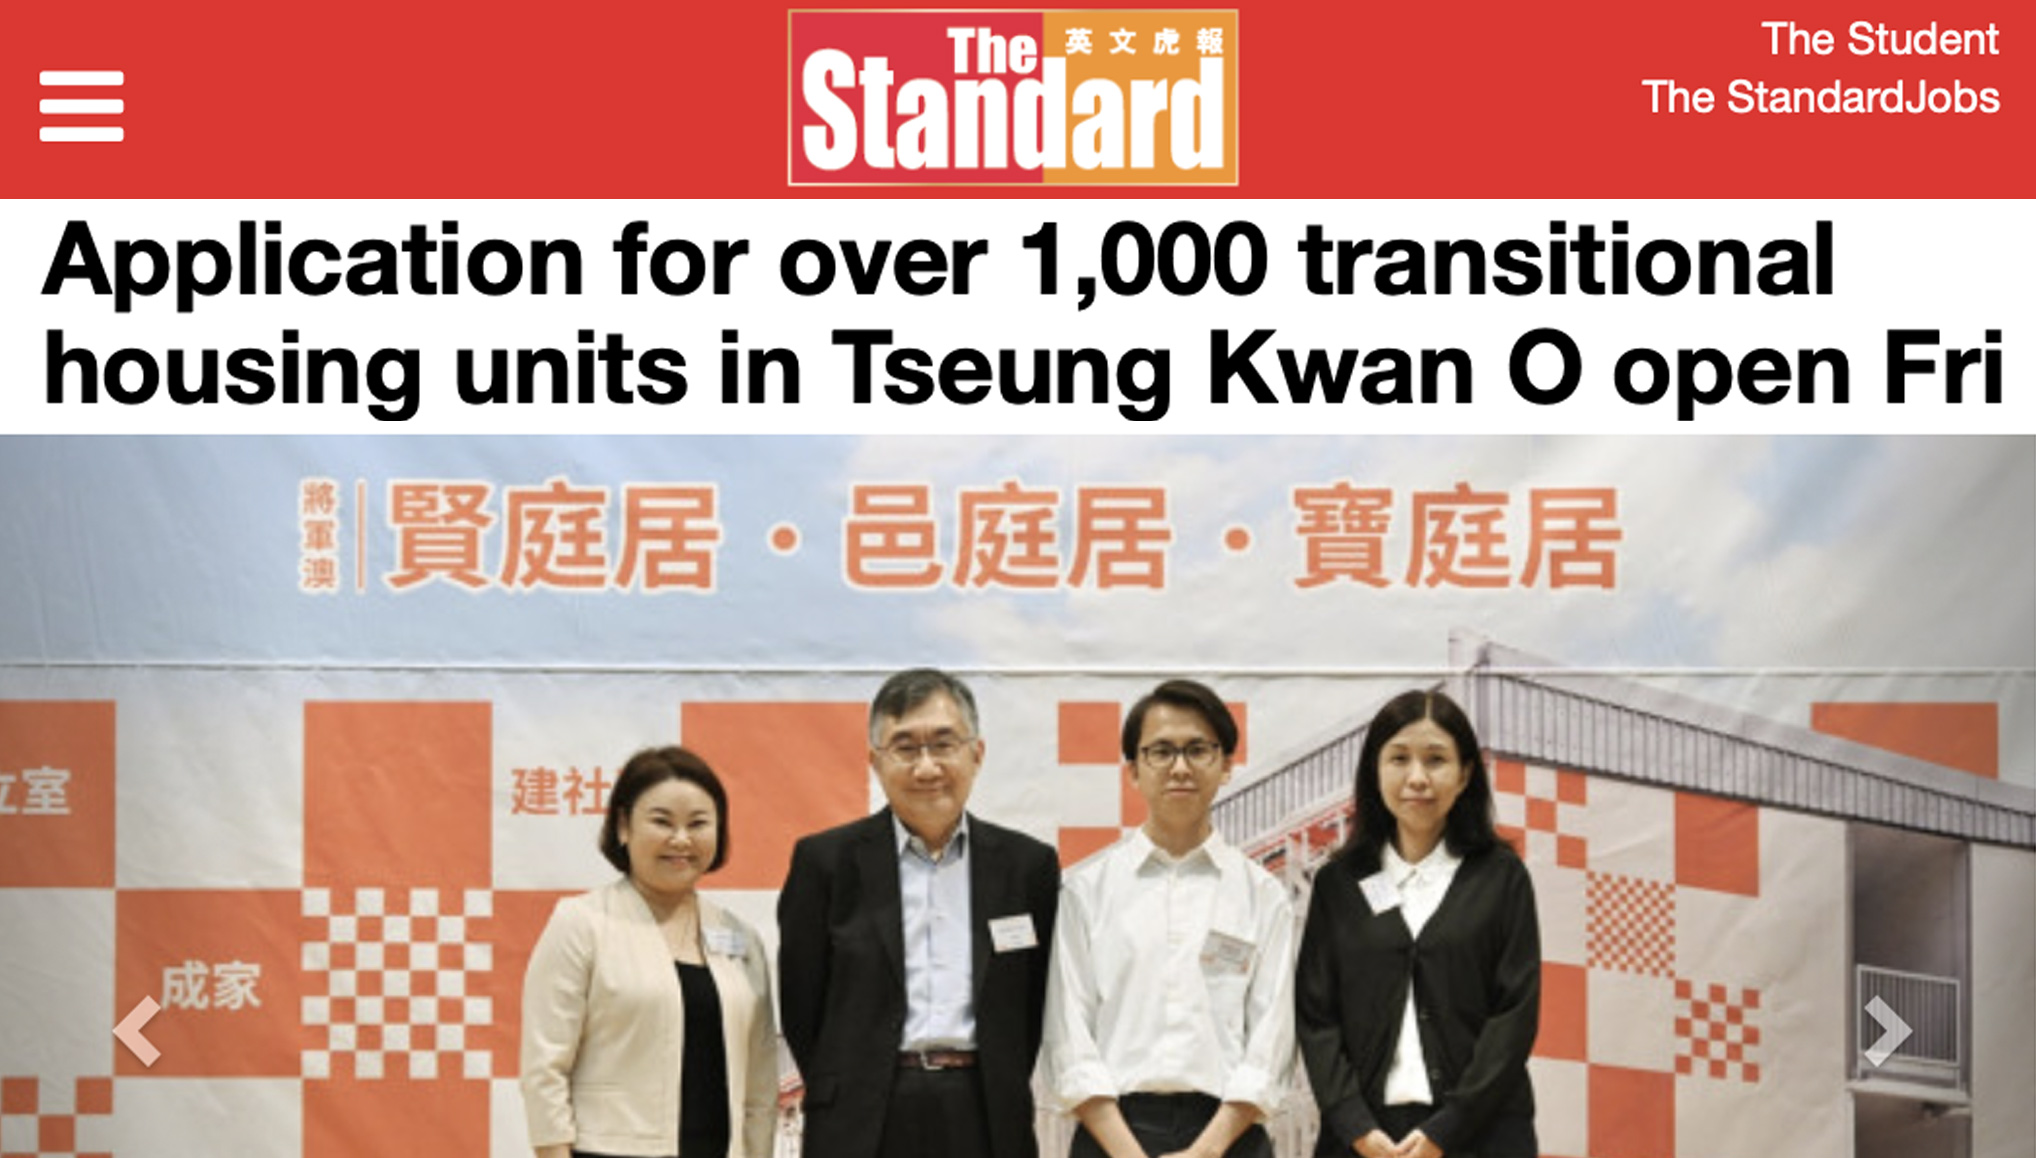 Cover Image - HK Standard - Application for over 1,000 transitional housing units in Tseung Kwan O open Fri